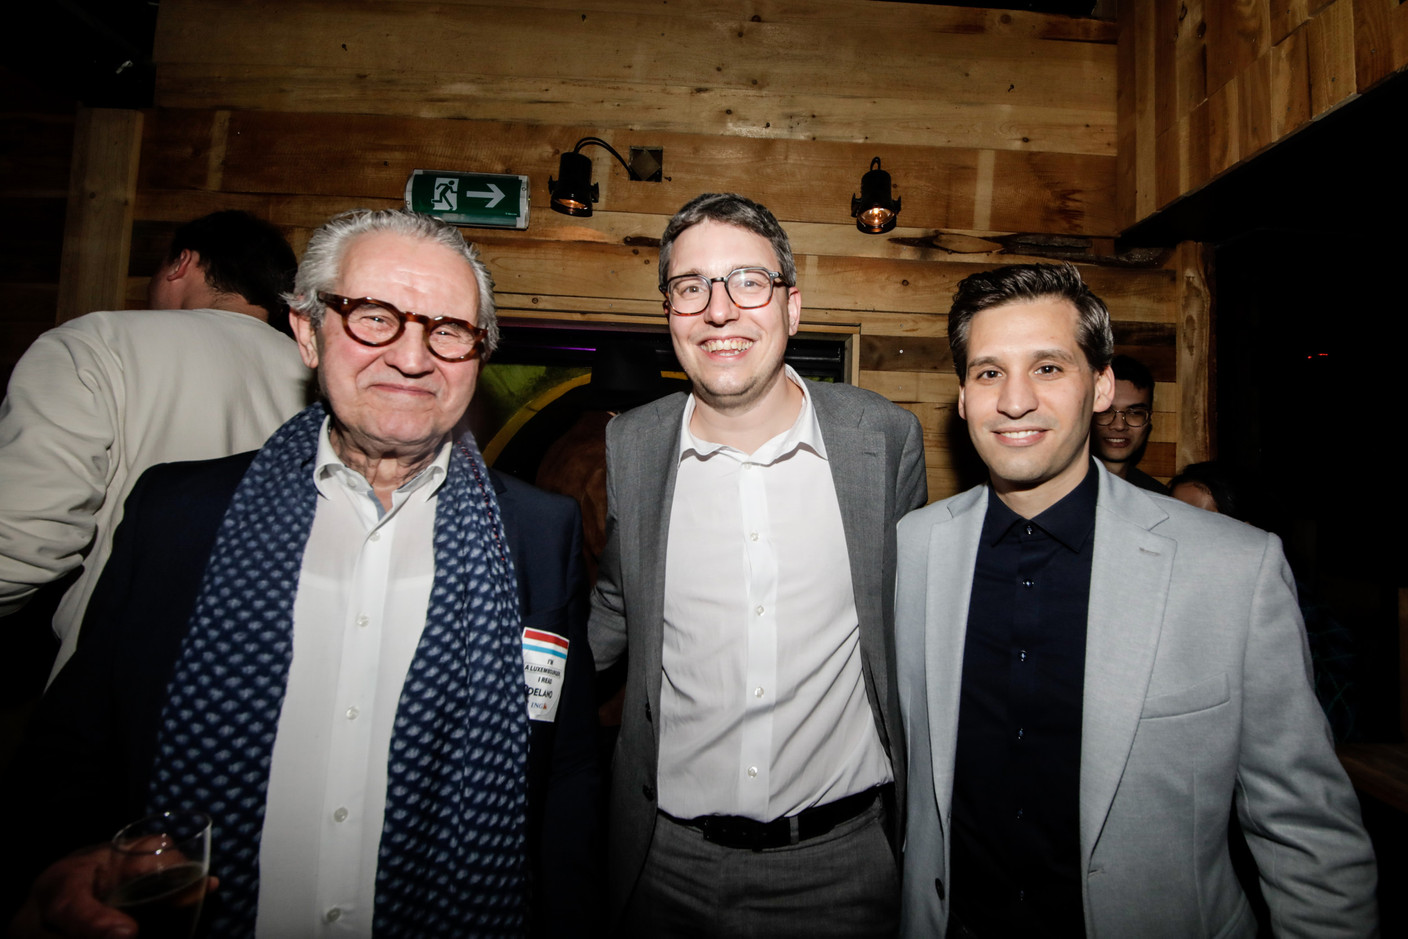 Sven Clement (Pirate Party MP), centre; Jerry Weyer (Taxx.lu), on right; seen during Delano’s 12th anniversary party, 23 February 2023. Photo: Marie Russillo/Maison Moderne